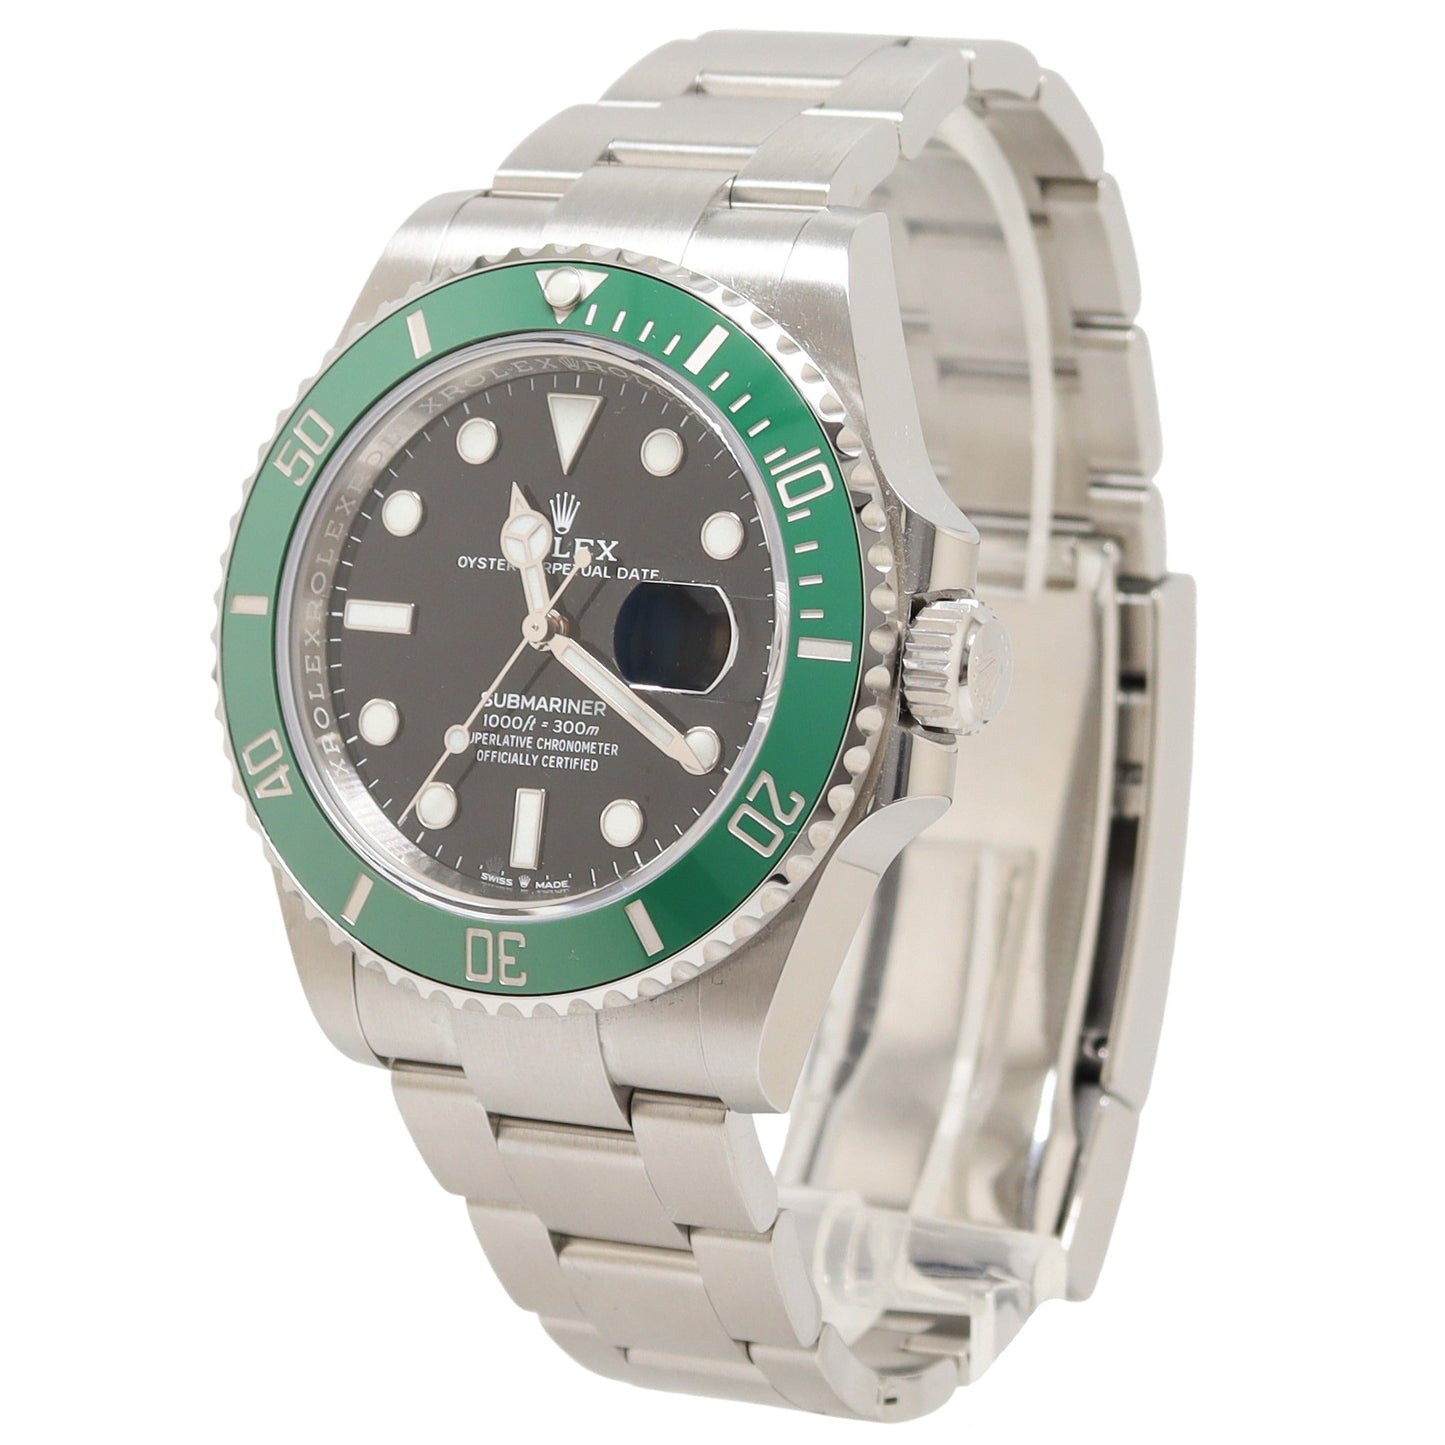 Rolex Submariner “Starbucks” Stainless Steel 41mm Black Dot Dial Watch Reference# 126610LV - Happy Jewelers Fine Jewelry Lifetime Warranty